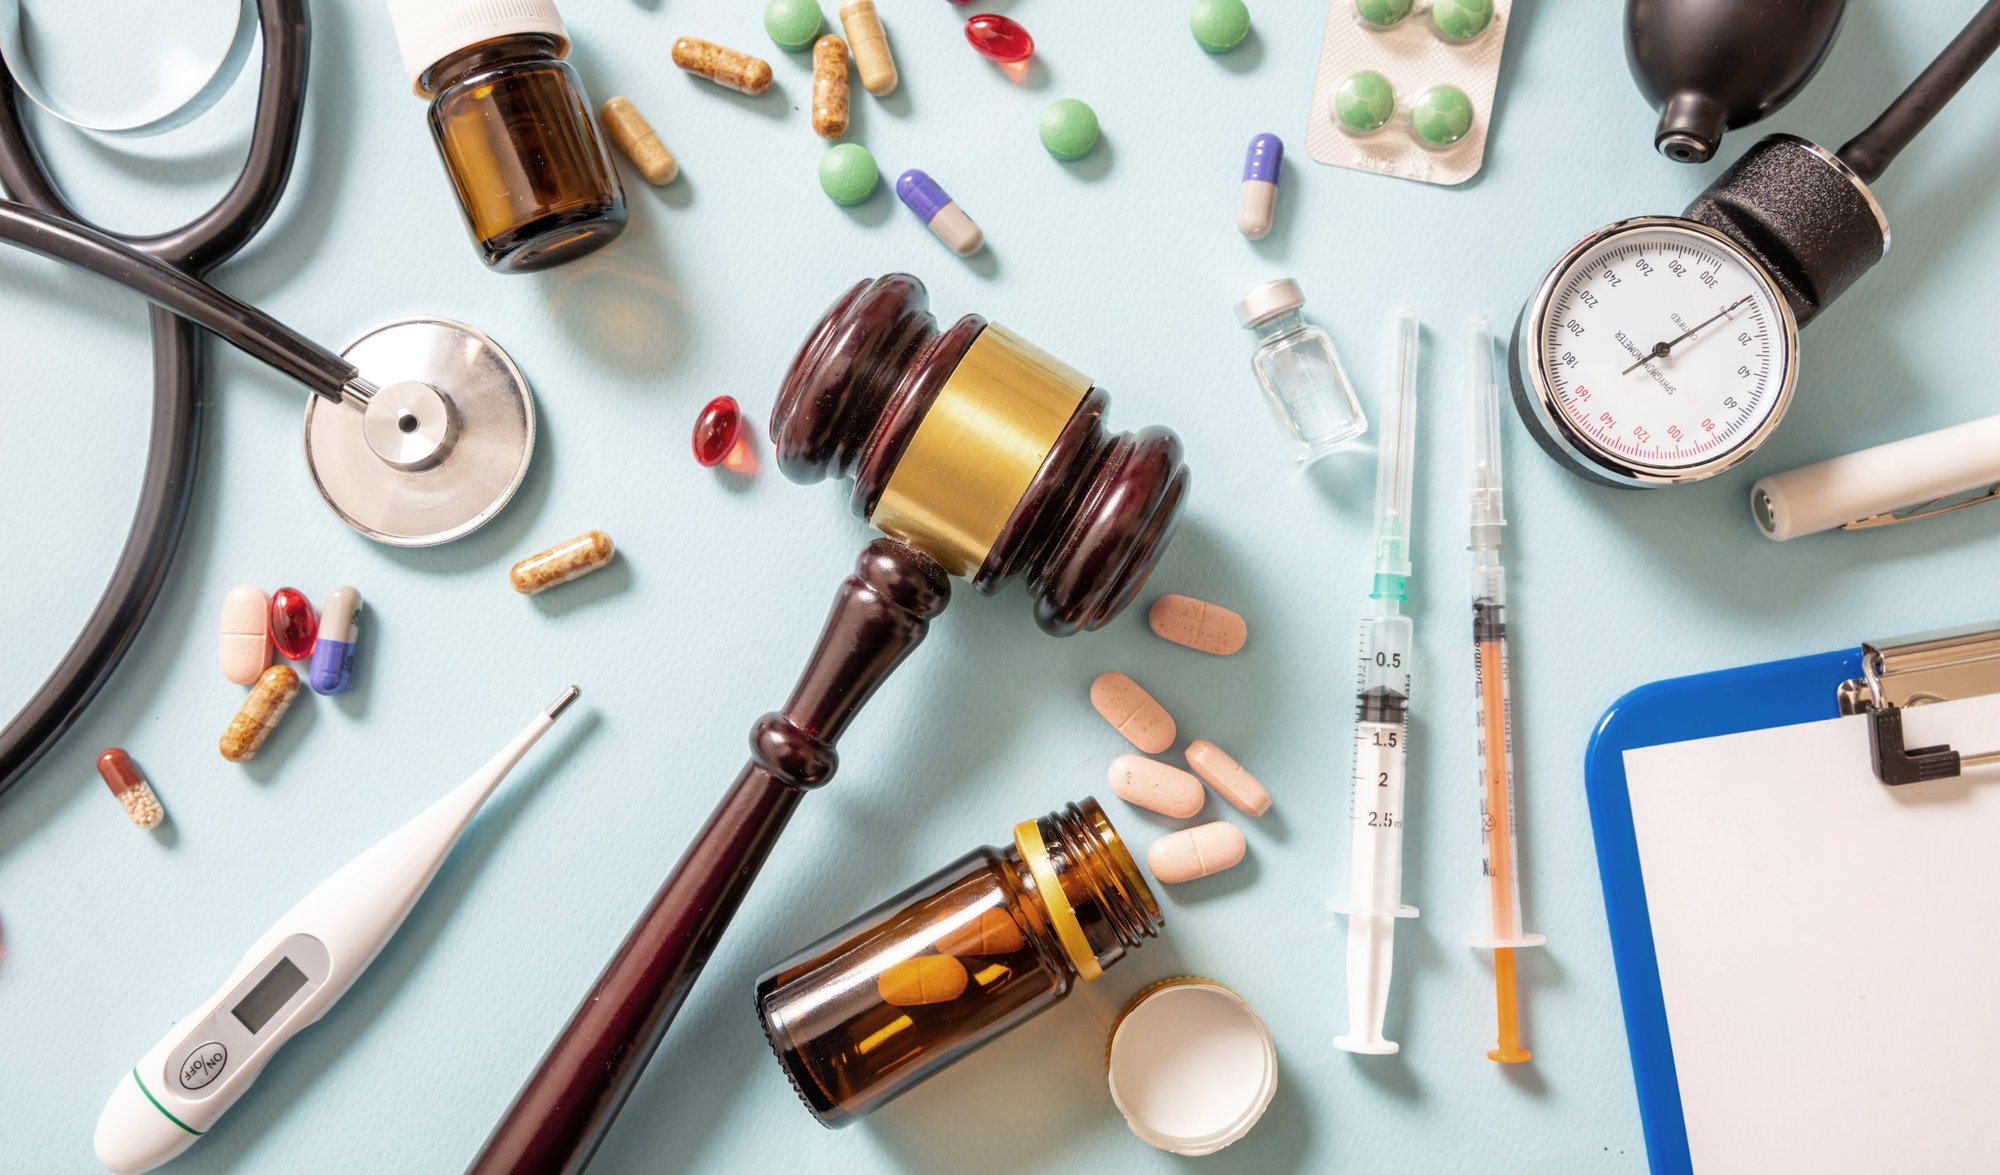 pills and healthcare items laying next to judge gavel